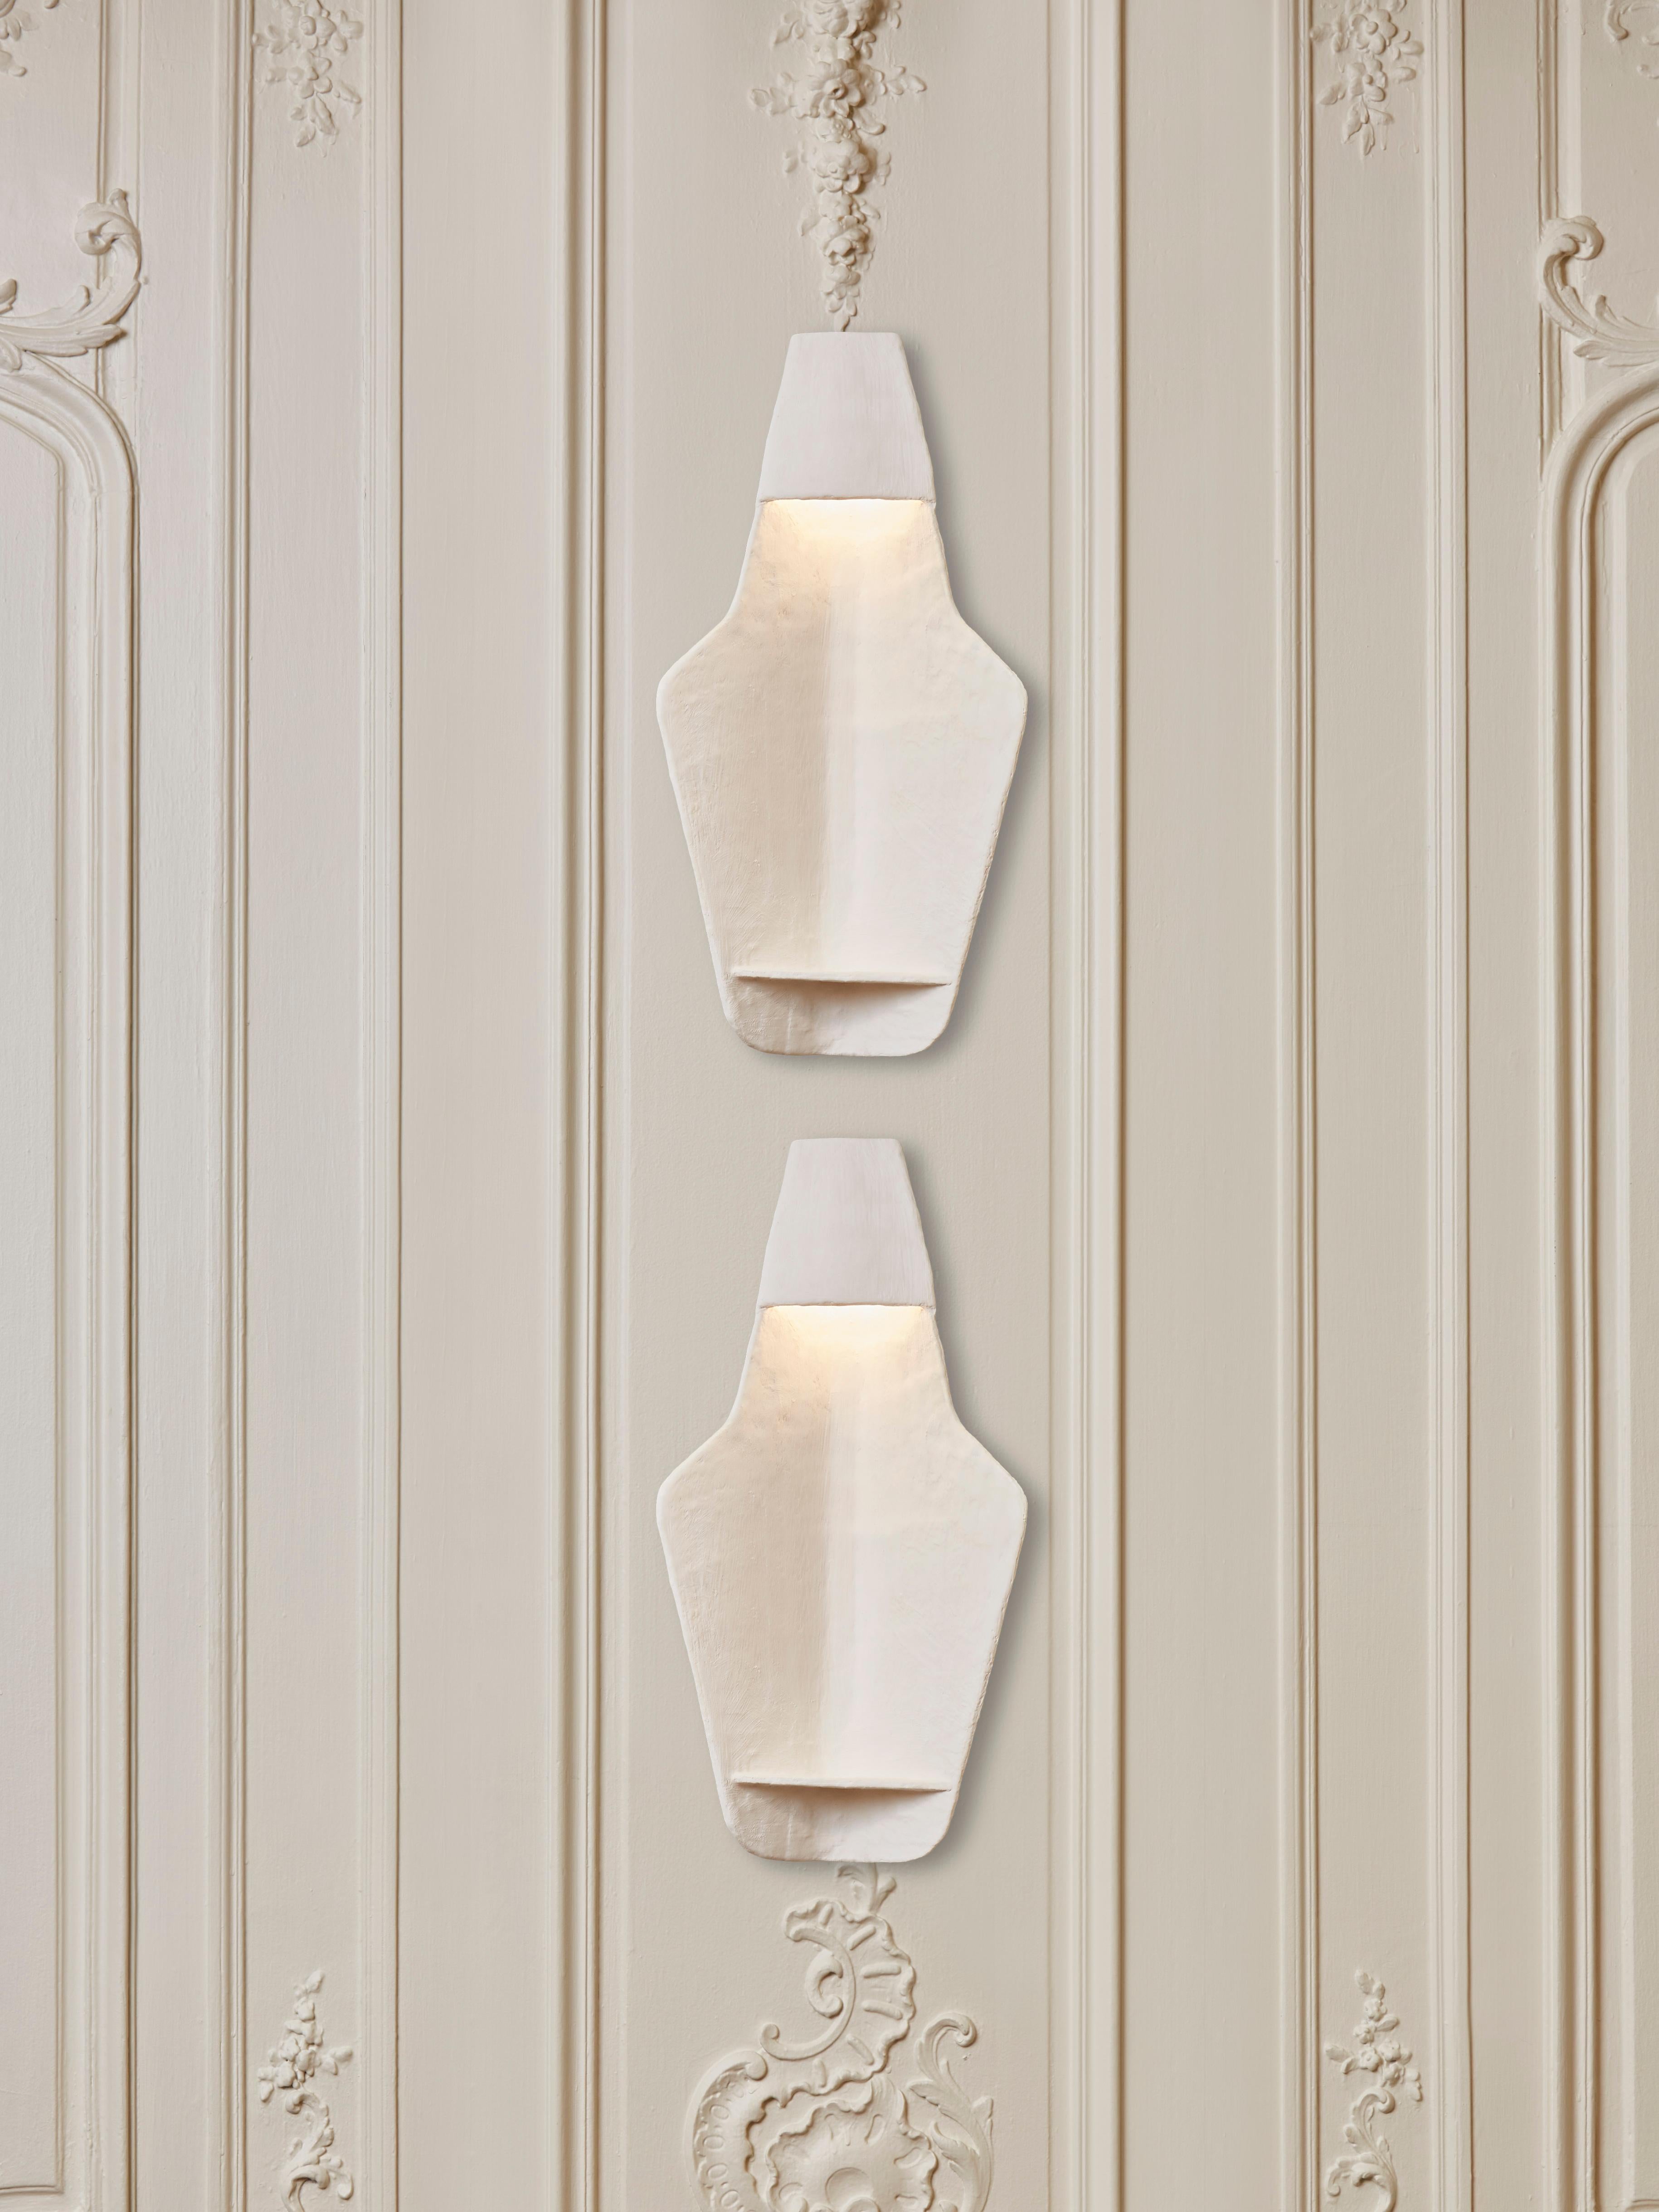 Elegant pair of wall sconces in plaster.
Signed piece by the french artist F. Weiss, 2021.